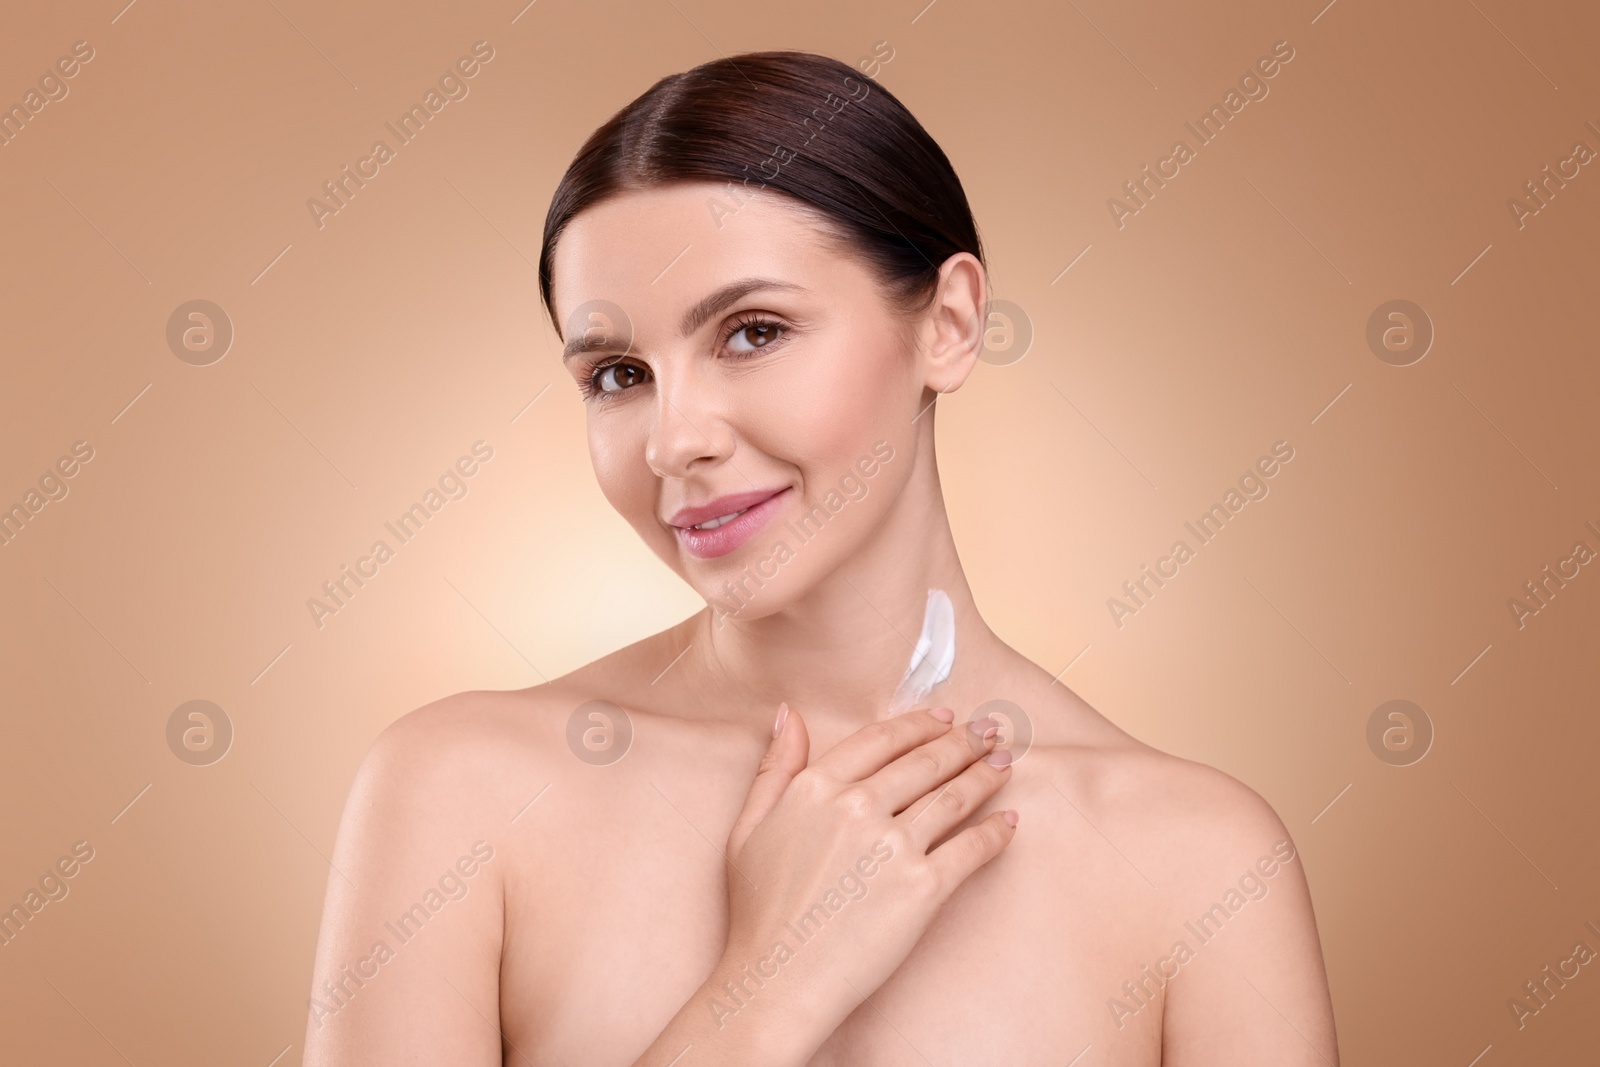 Photo of Beautiful woman with smear of body cream on her neck against light brown background